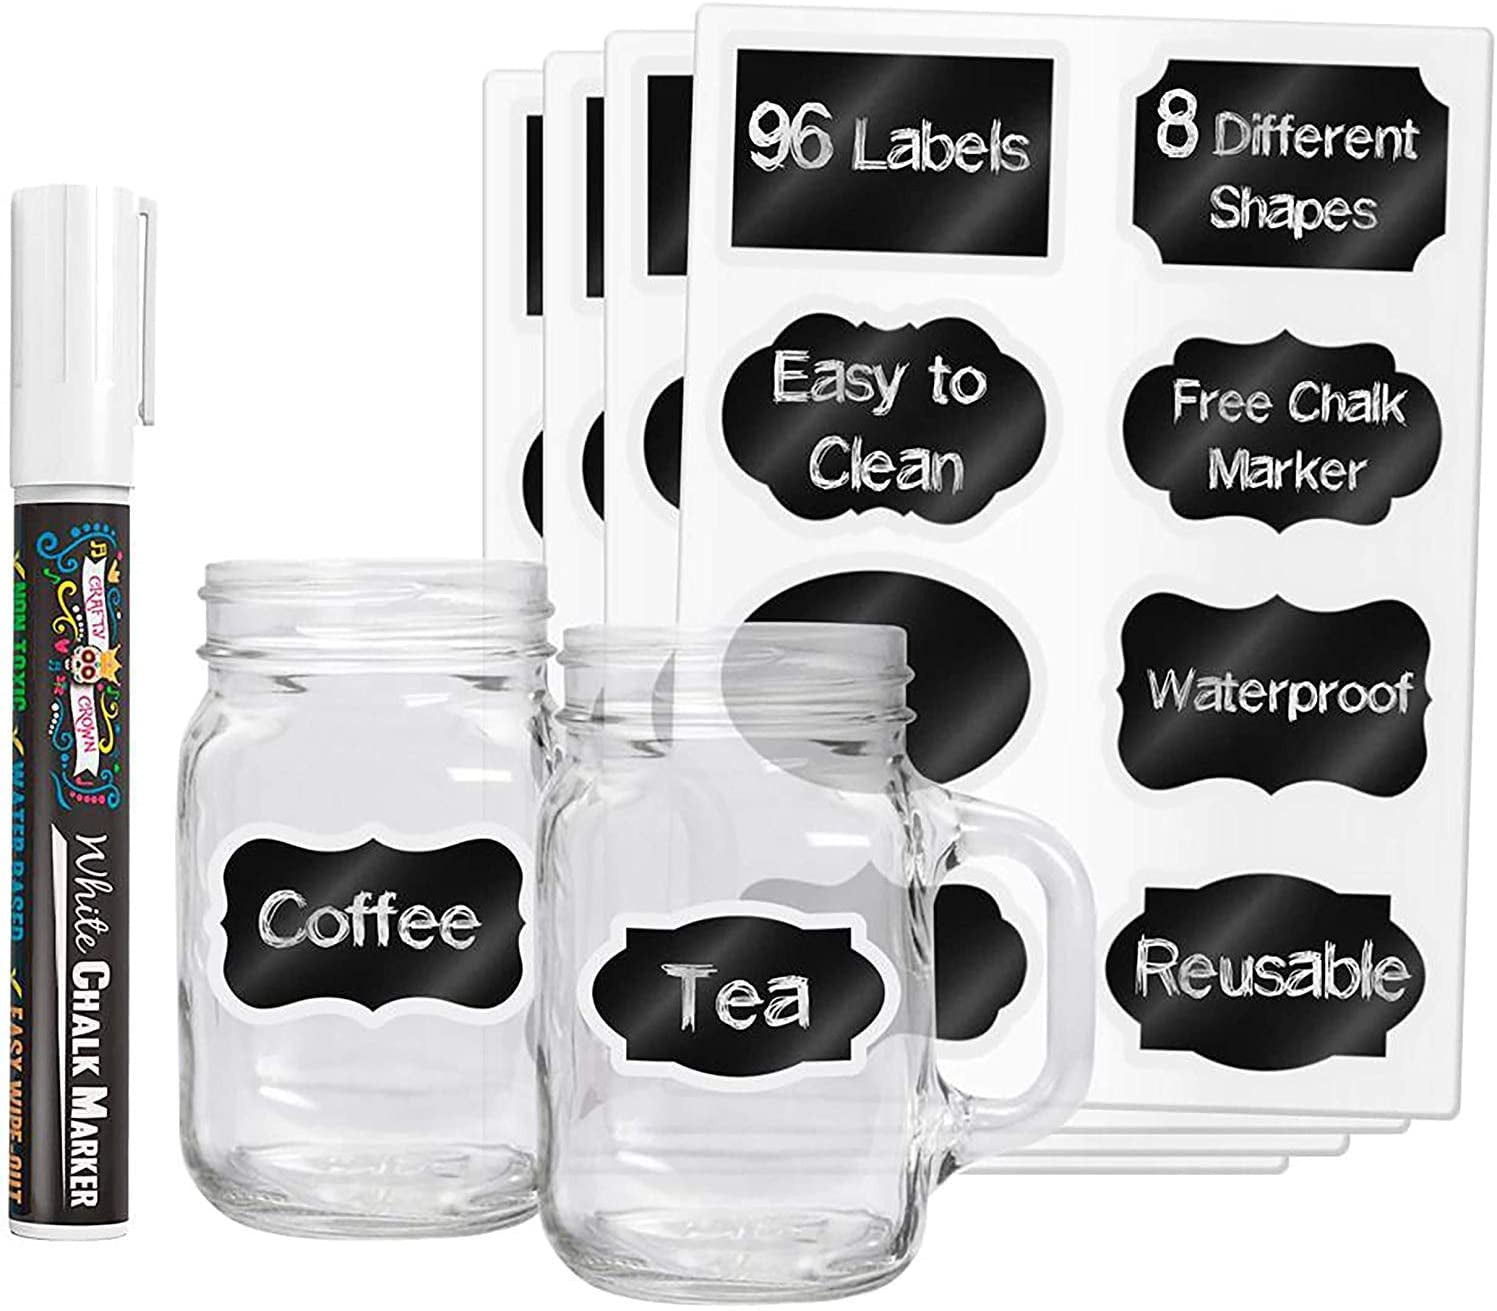 96 Chalkboard Labels for Organizing, Chalkboard Stickers Chalk Maker, Chalk  Labels for Containers, Pantry Labels for Storage Bins, Removable